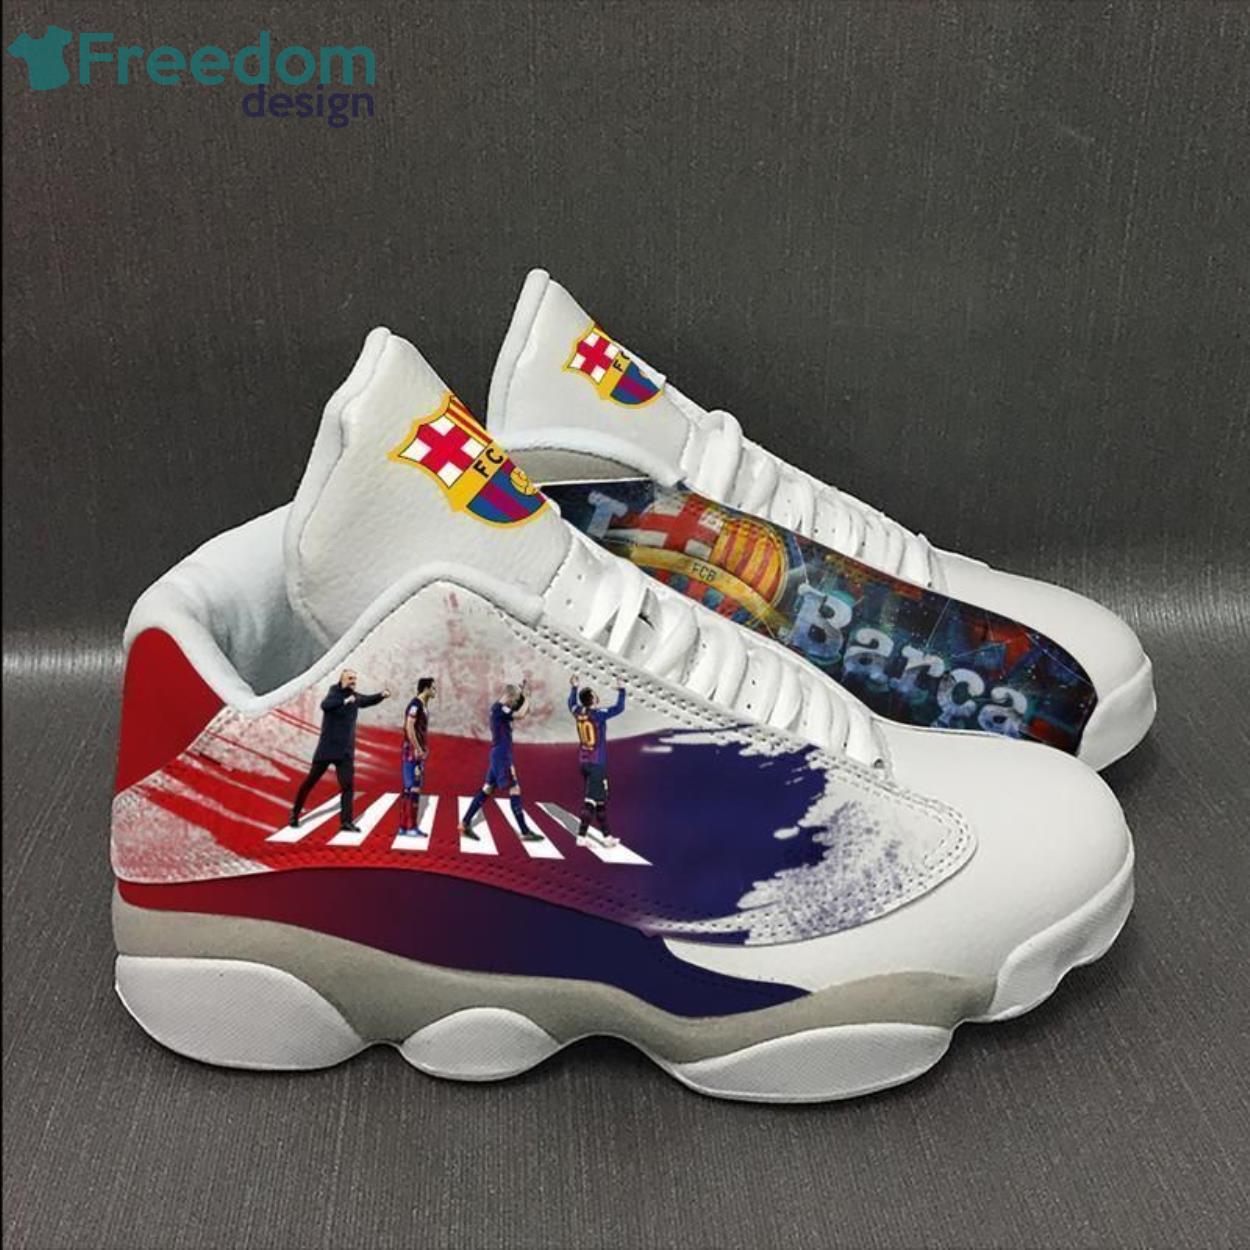 Barcelona Football Team Form Air Jordan 13 Sneakers Personalized Shoes